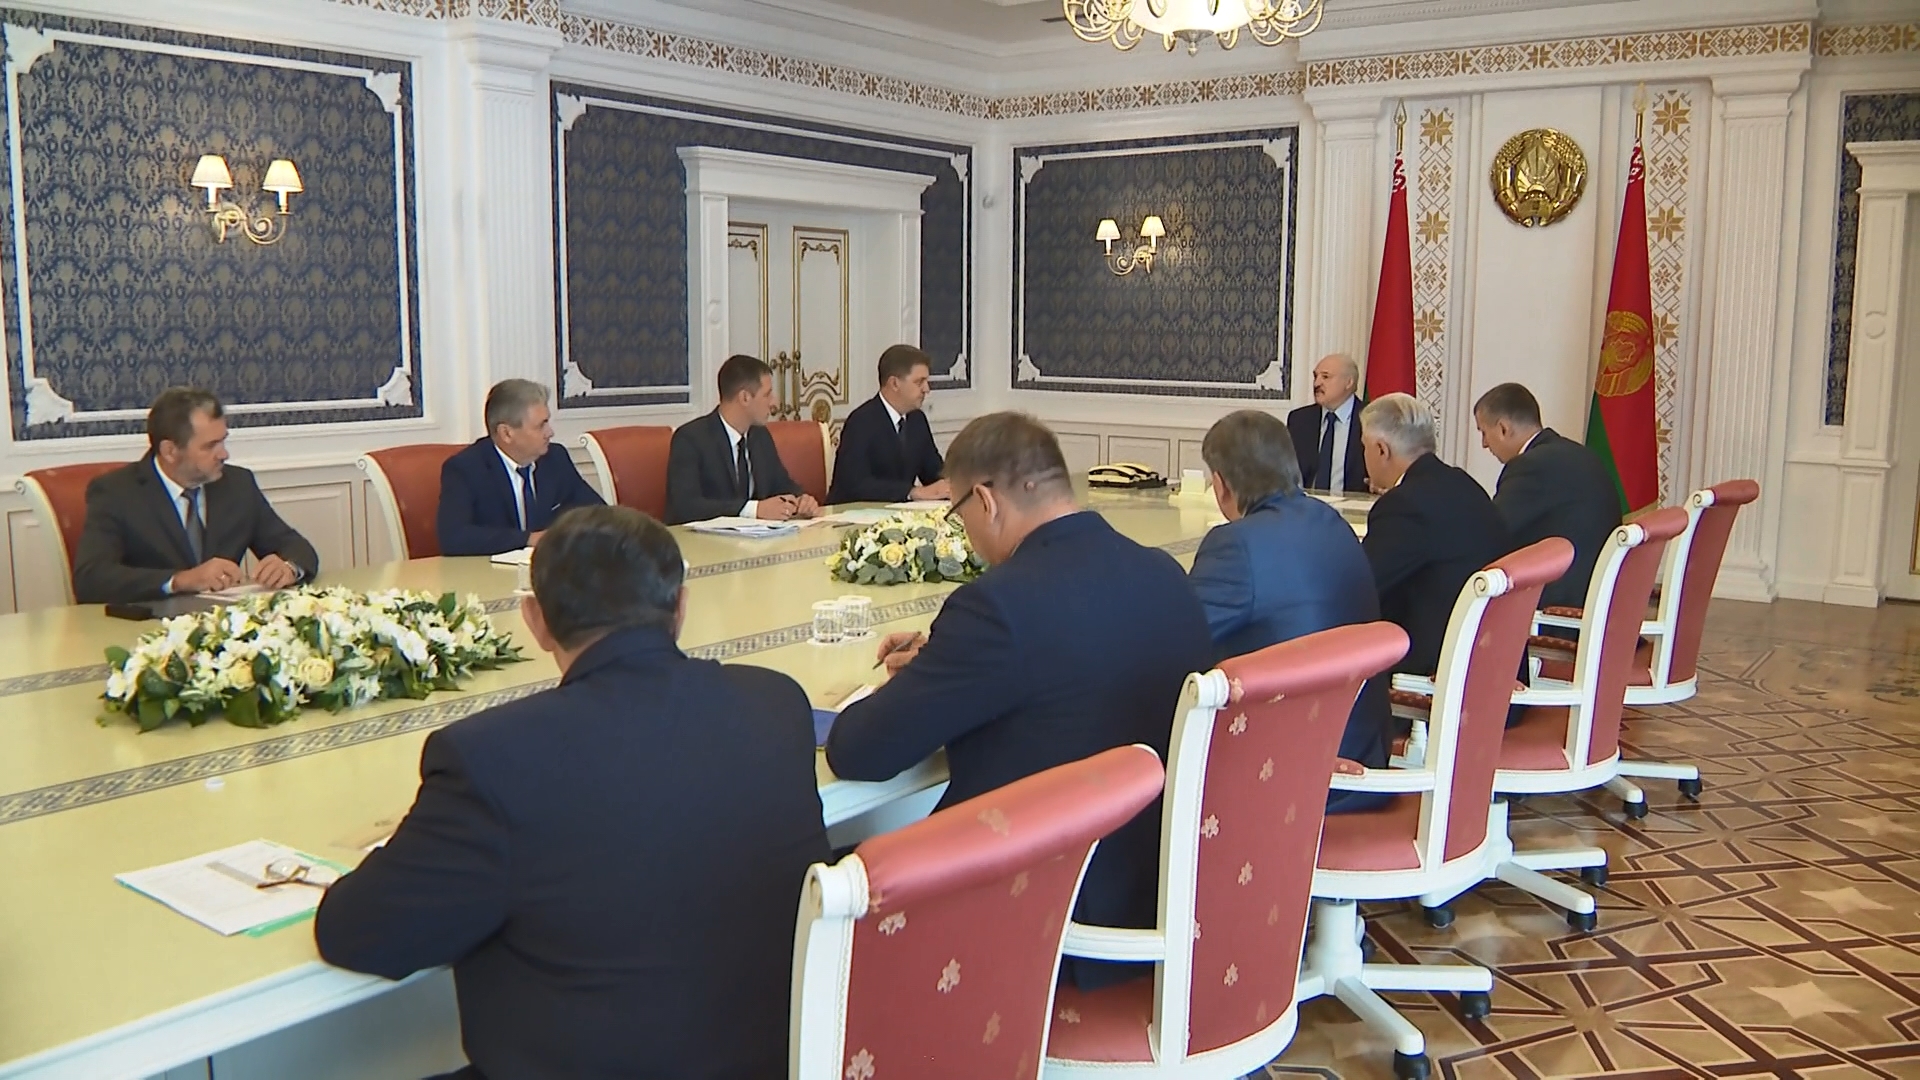 Prospects for development of construction industry discussed today at meeting in Palace of Independence